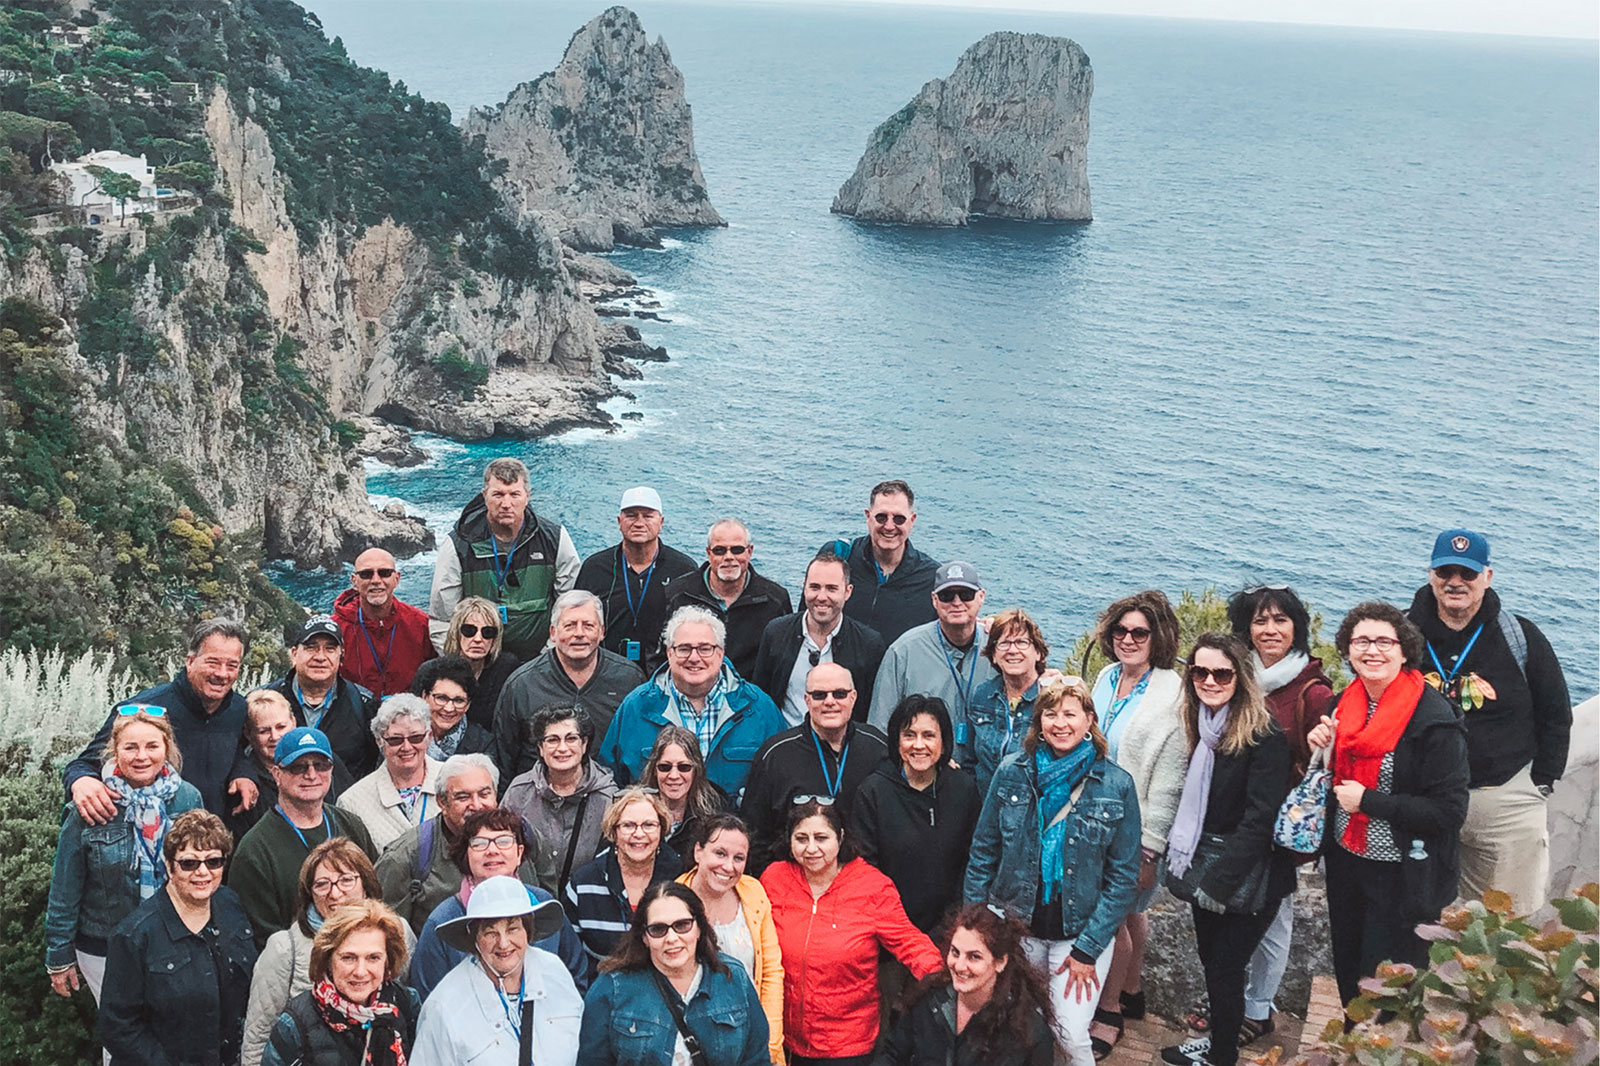 Trip of a lifetime: LaMacchia Travel offering guided tour of Northern Italy | Kenosha.com